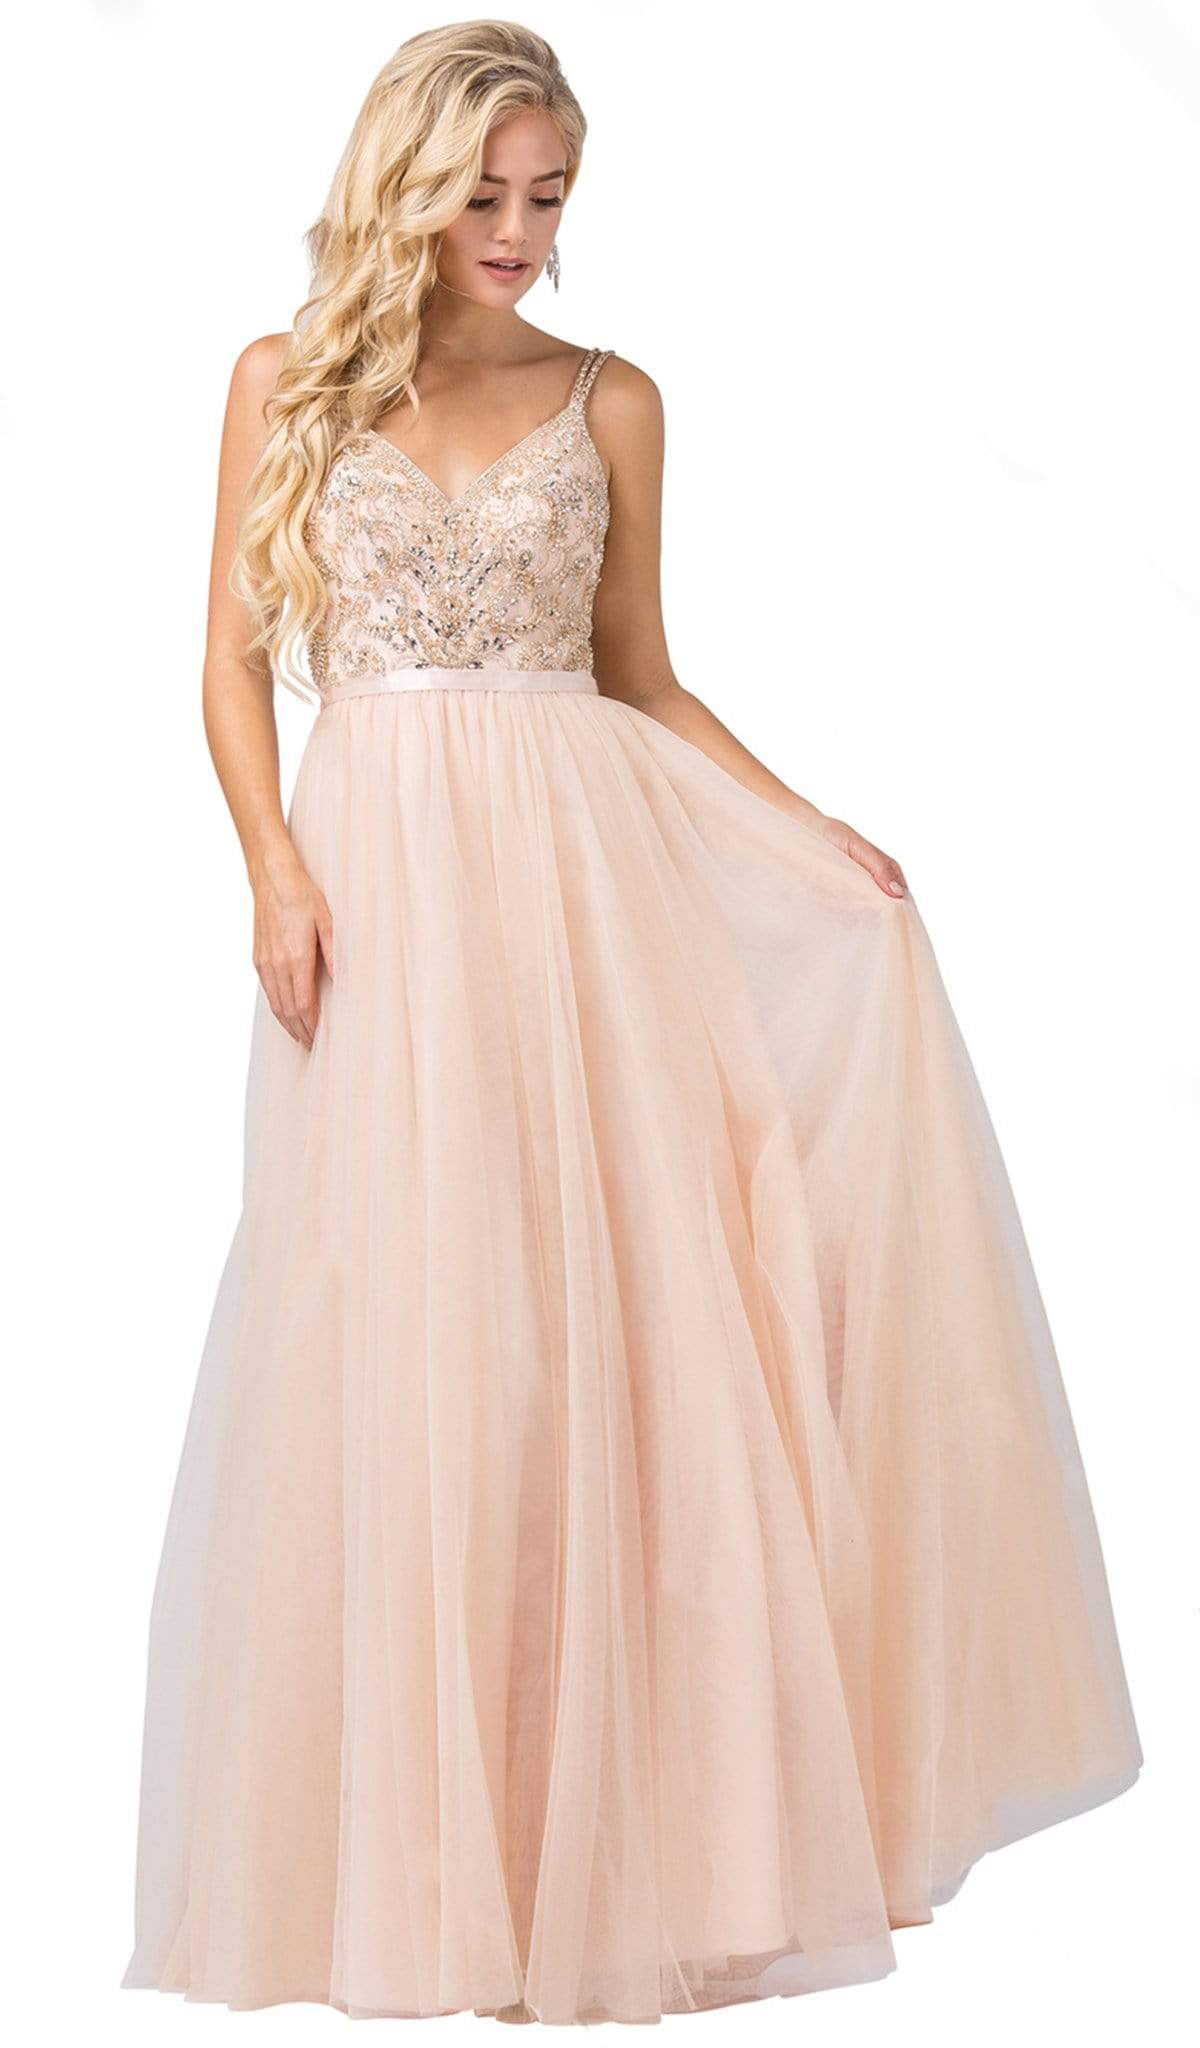 Dancing Queen - Embellished Bodice A-Line Chiffon Gown 2519SC In Neutral